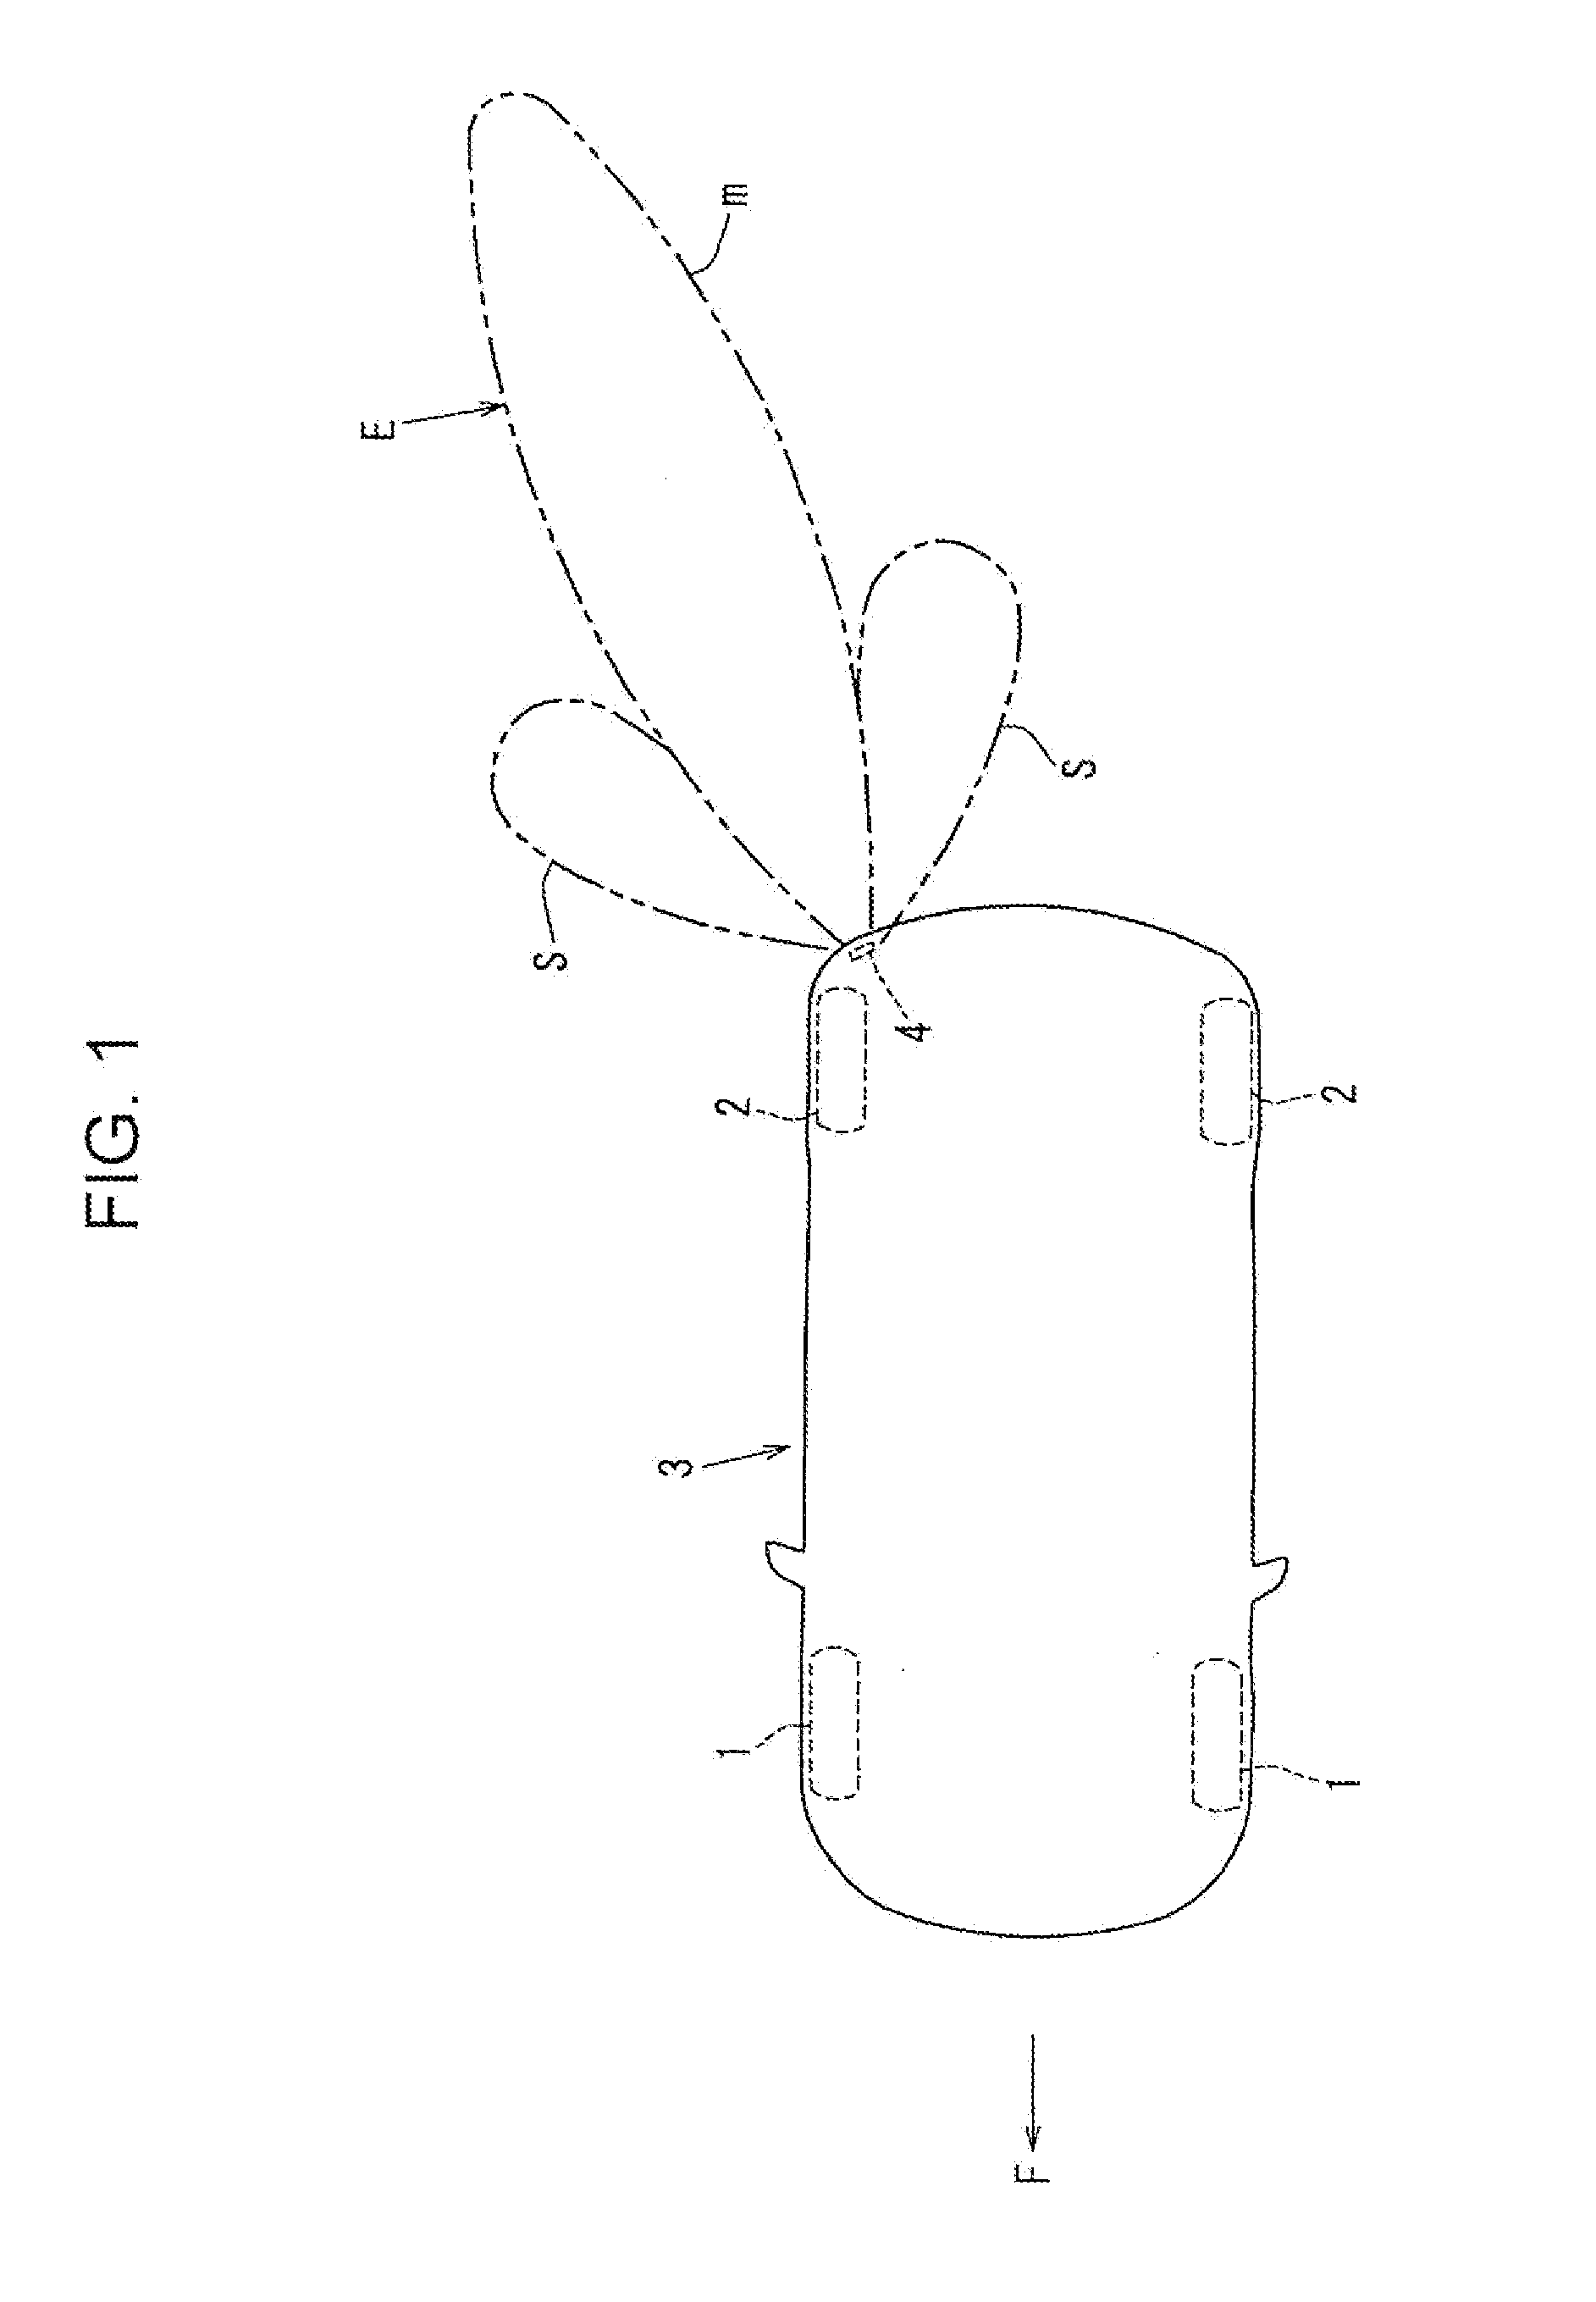 Obstacle detection device for vehicle